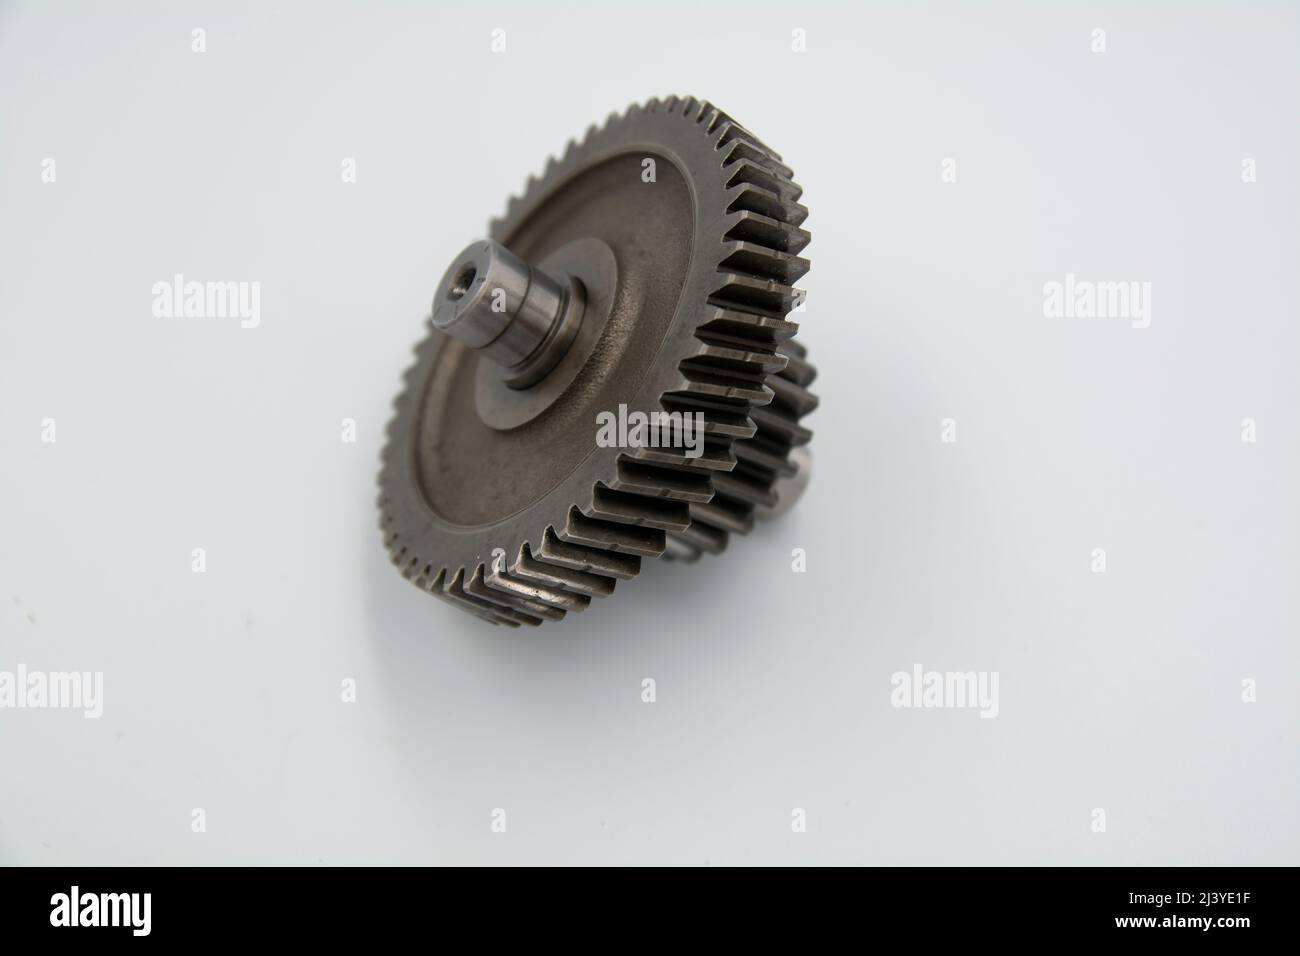 Gear set of a motorcycle gearbox Stock Photo